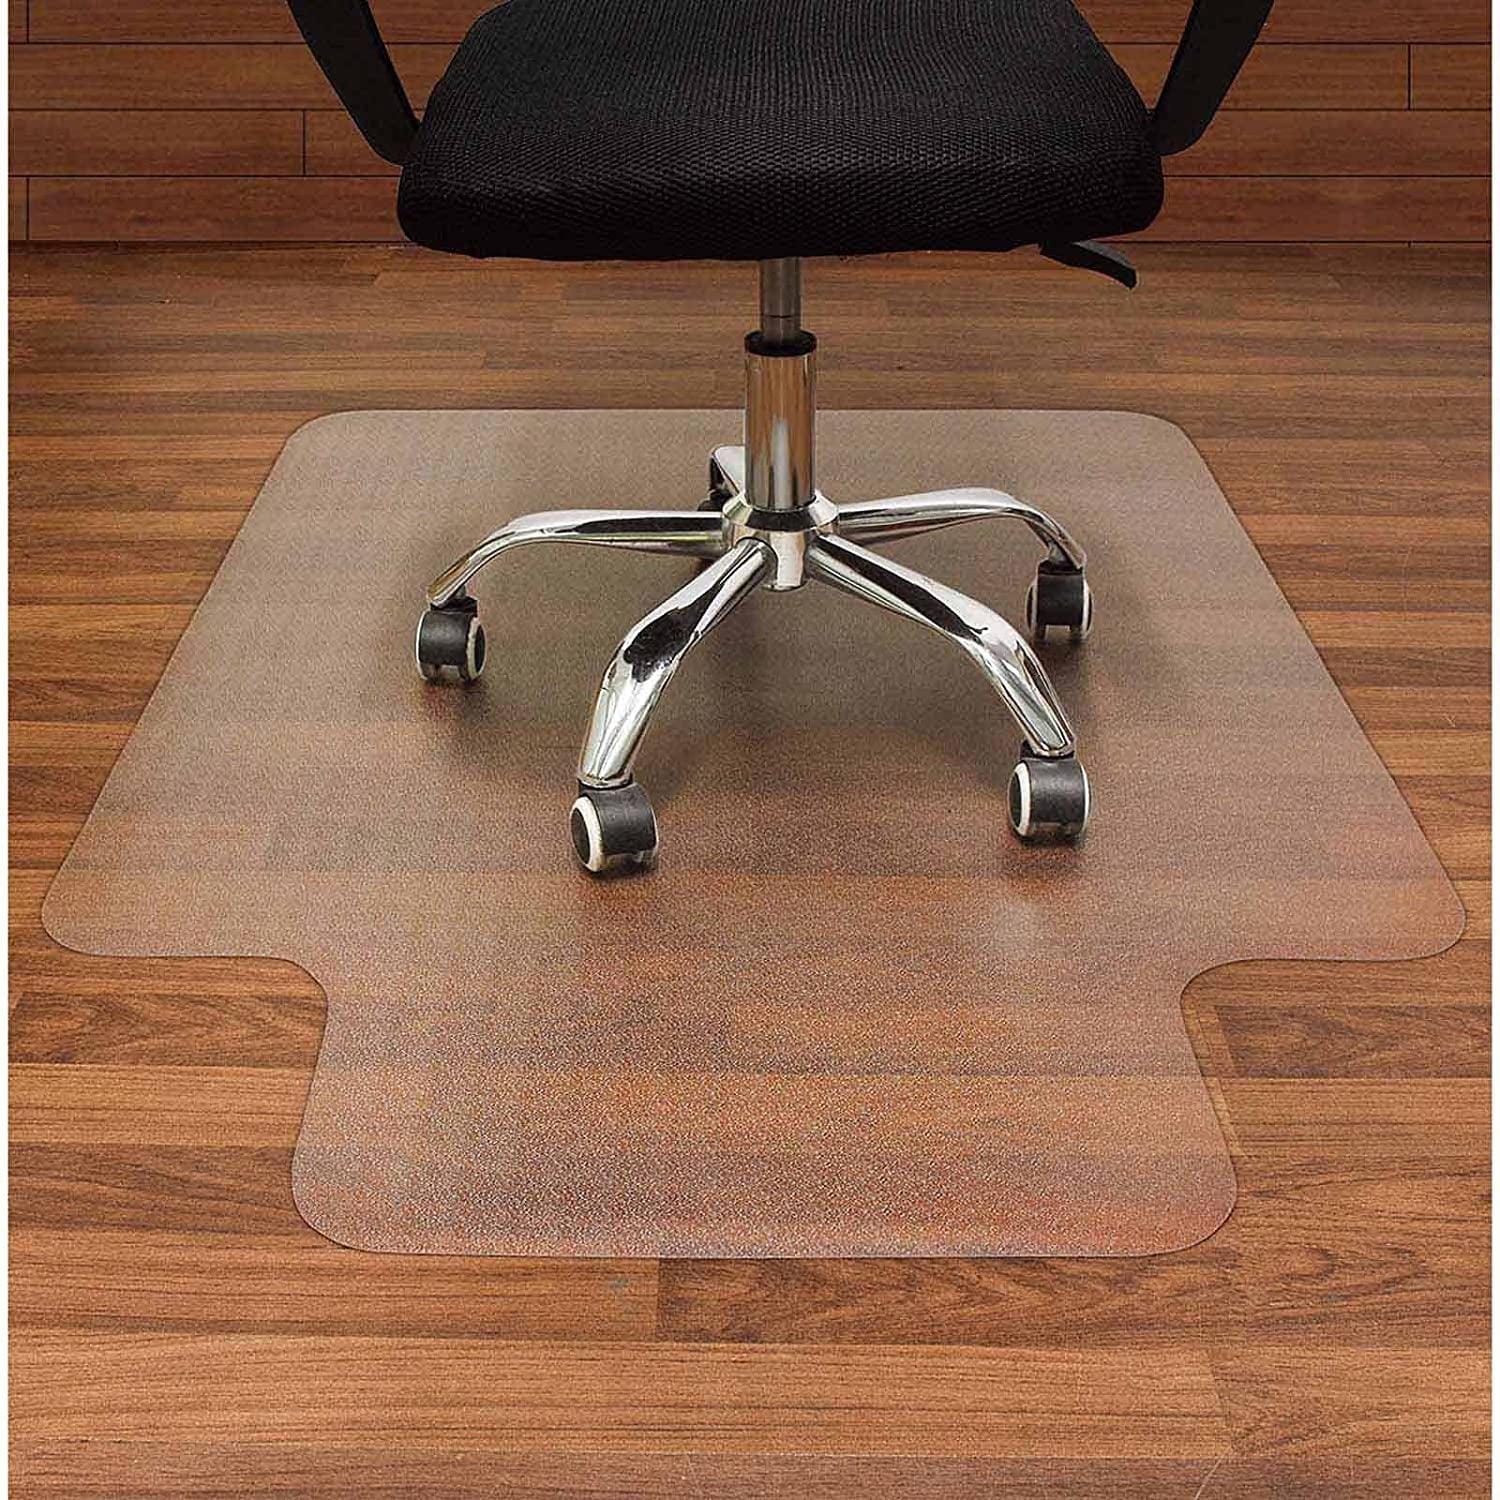 Professional Protector Mat Area Rug,Non Slip Protective Floor Mat for Home Office Study,Multi-Purpose Low Pile Desk Chair Mat for Hardwood Floor Carpet,Round Pattern Chair Cushion 